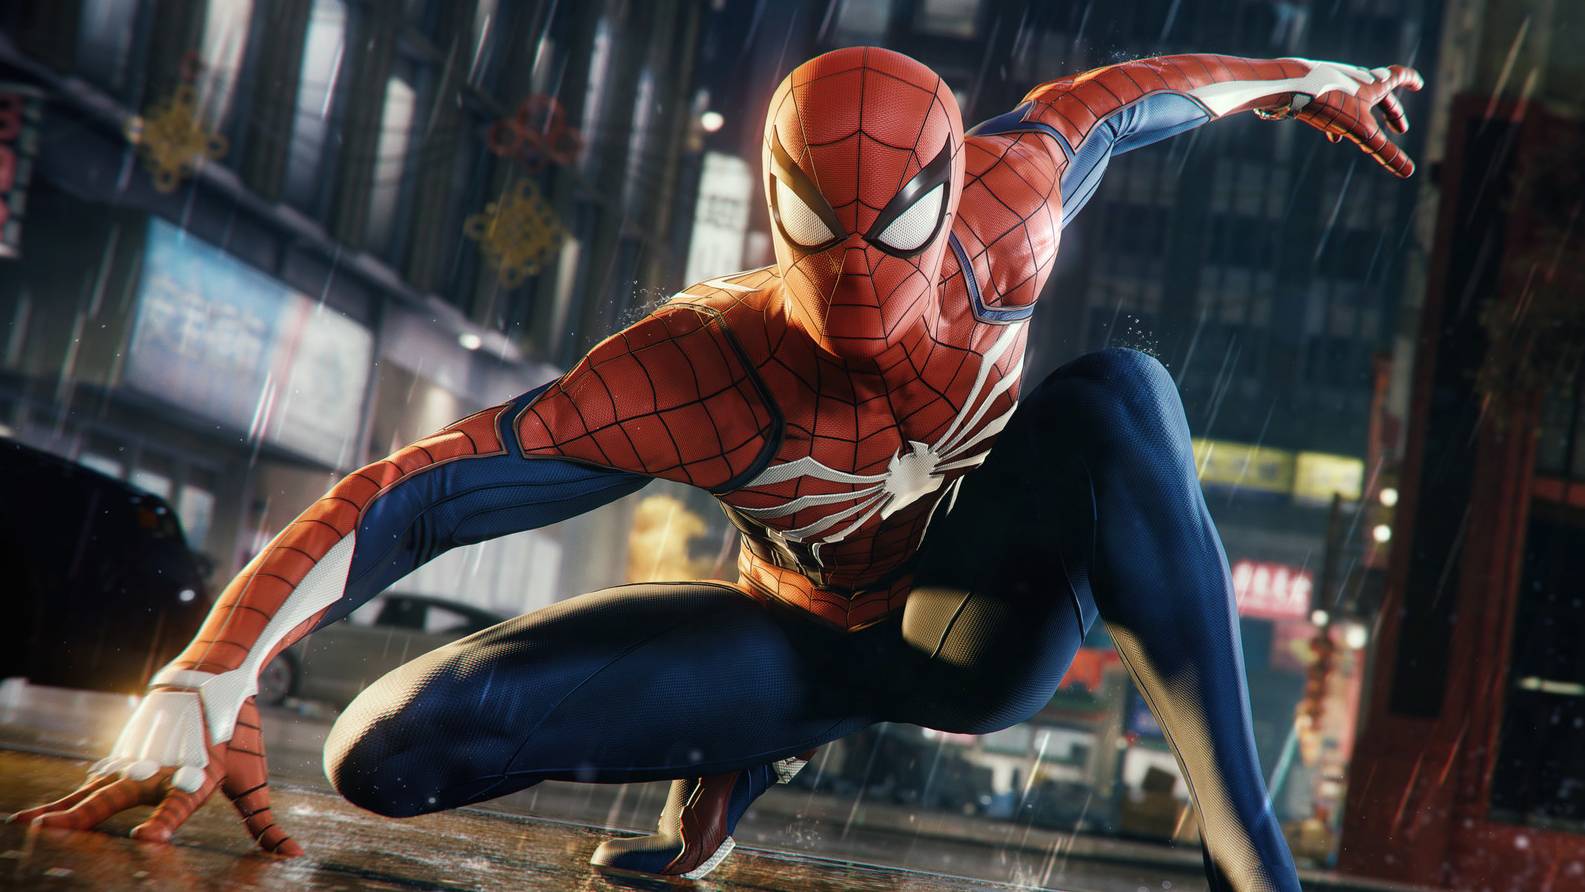 Grab up to 40% off the Marvel's Spider-Man series in huge Steam sale